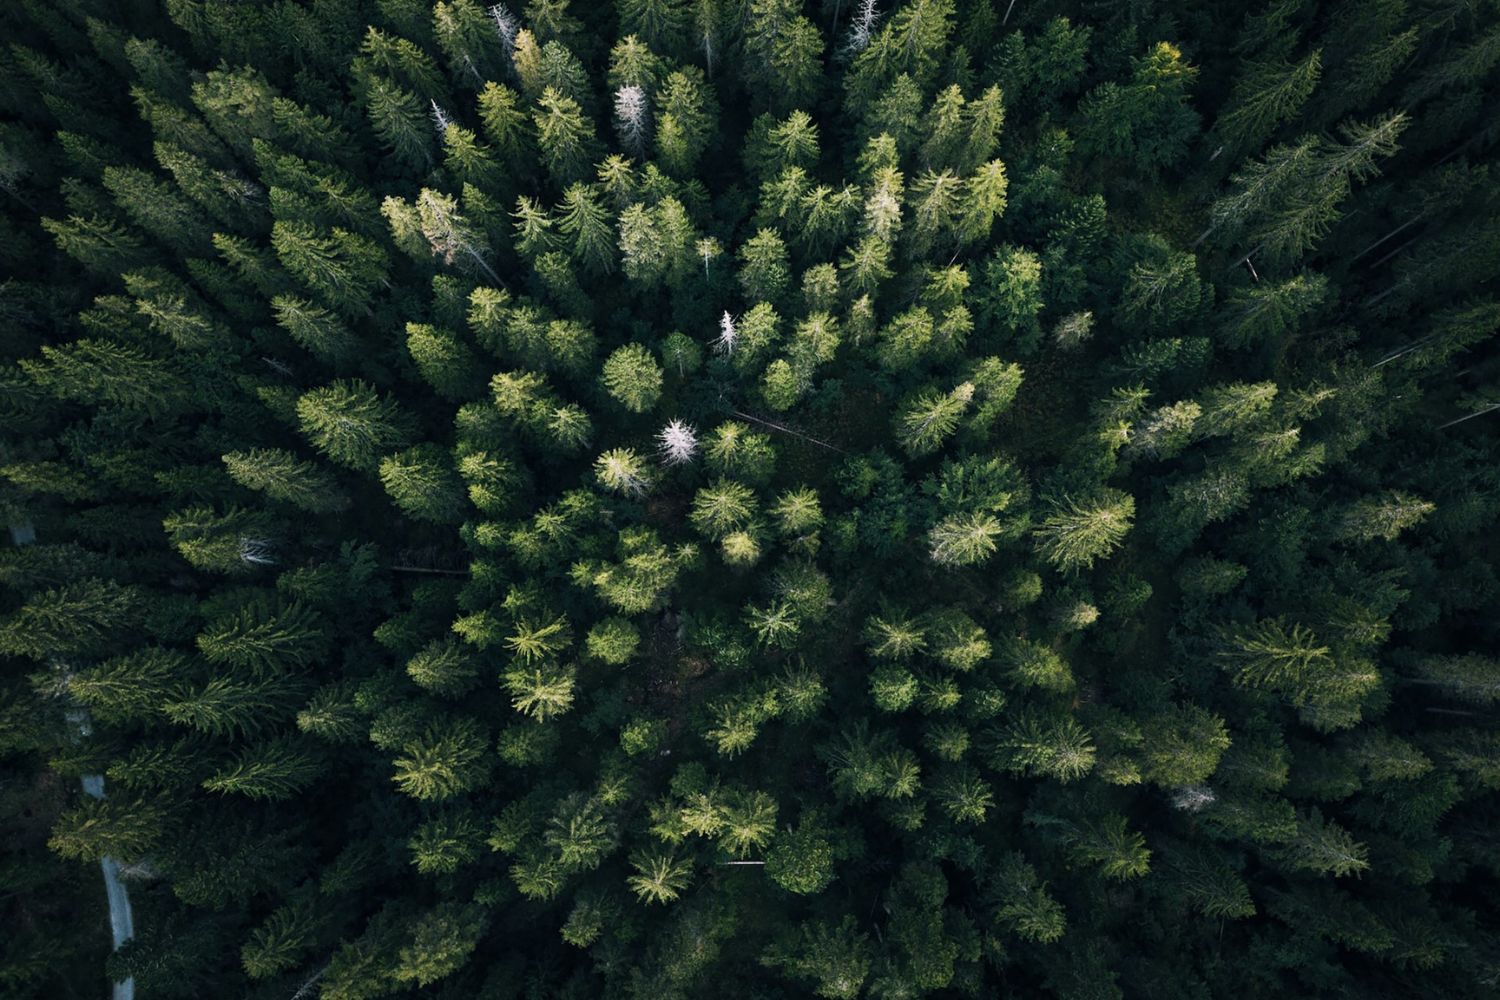 bird's eye view photo of the forest